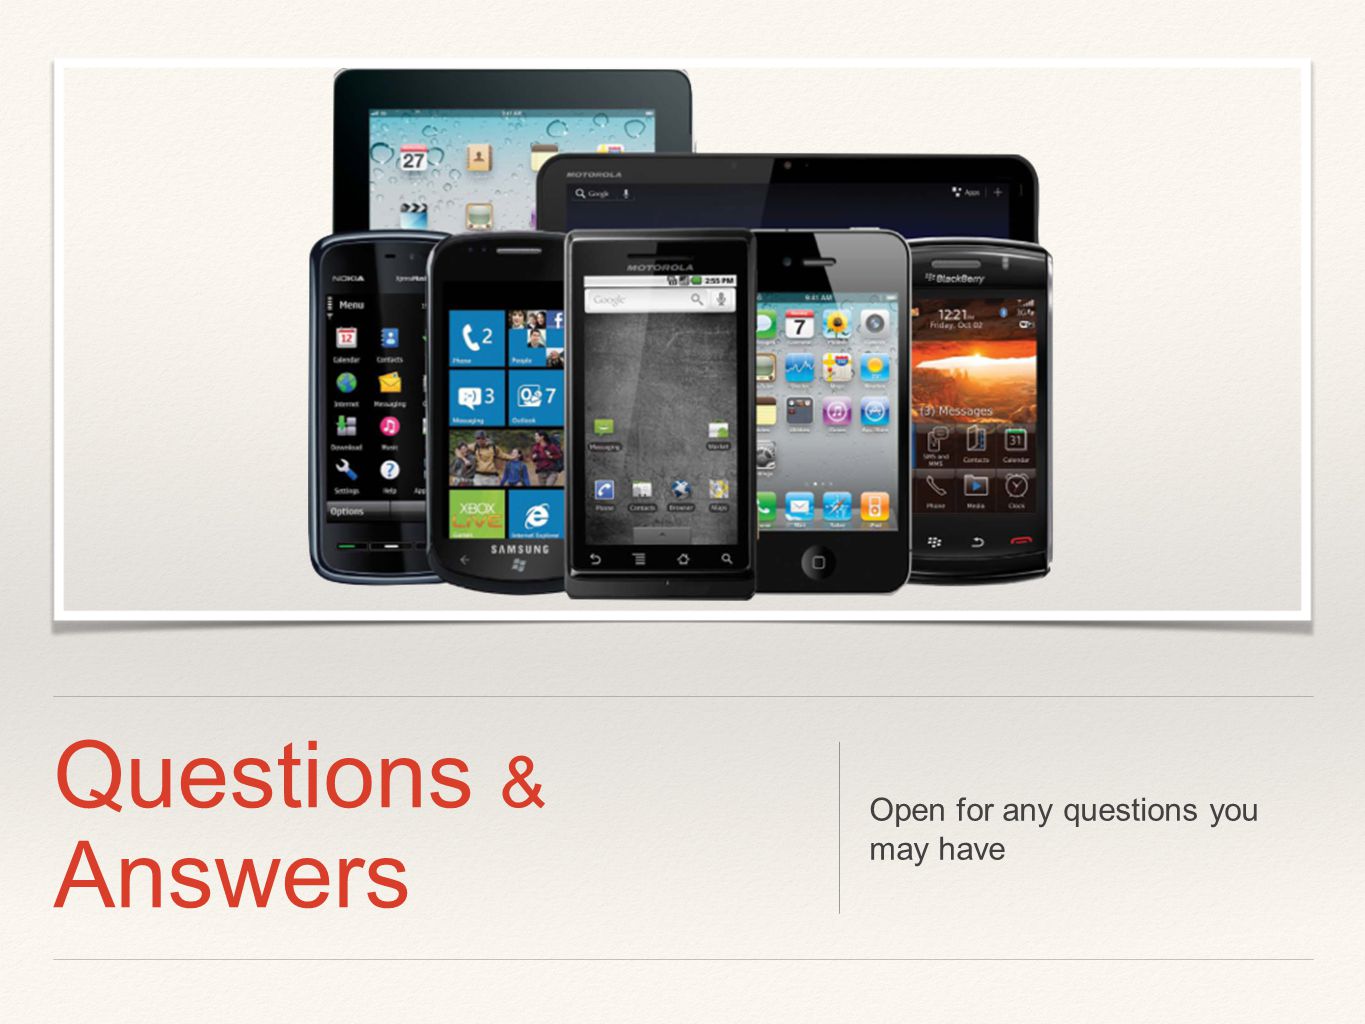 Questions & Answers Open for any questions you may have